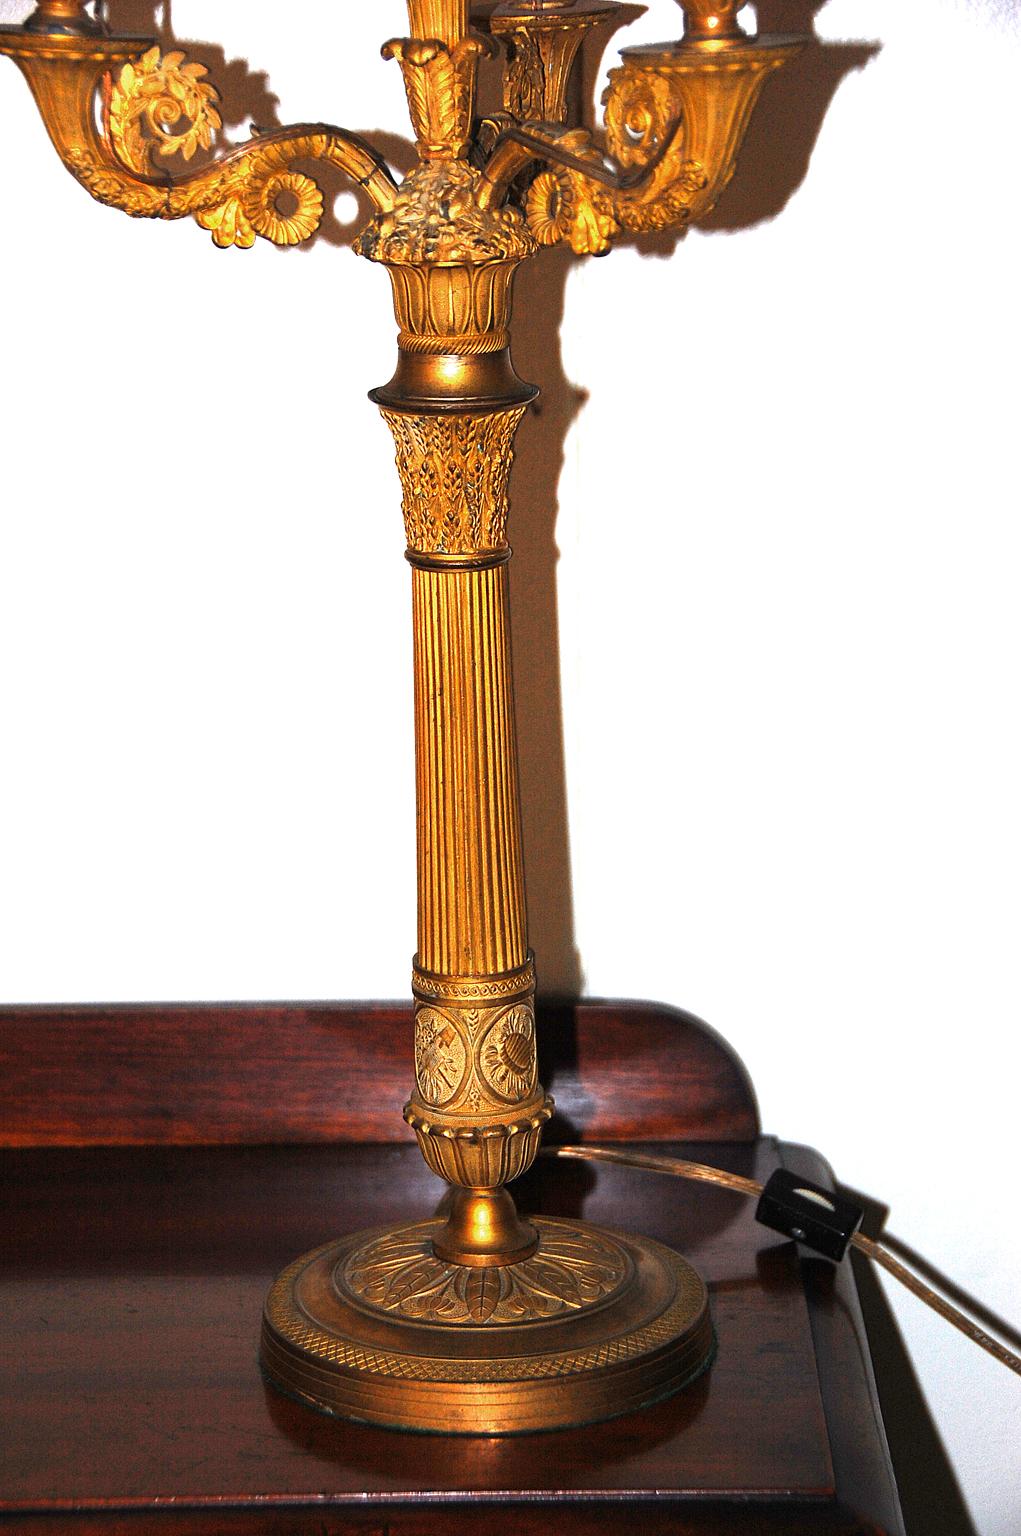 19th Century French Ormolu Electrified Three-Light Candelabra with Adjustable Tole Shade